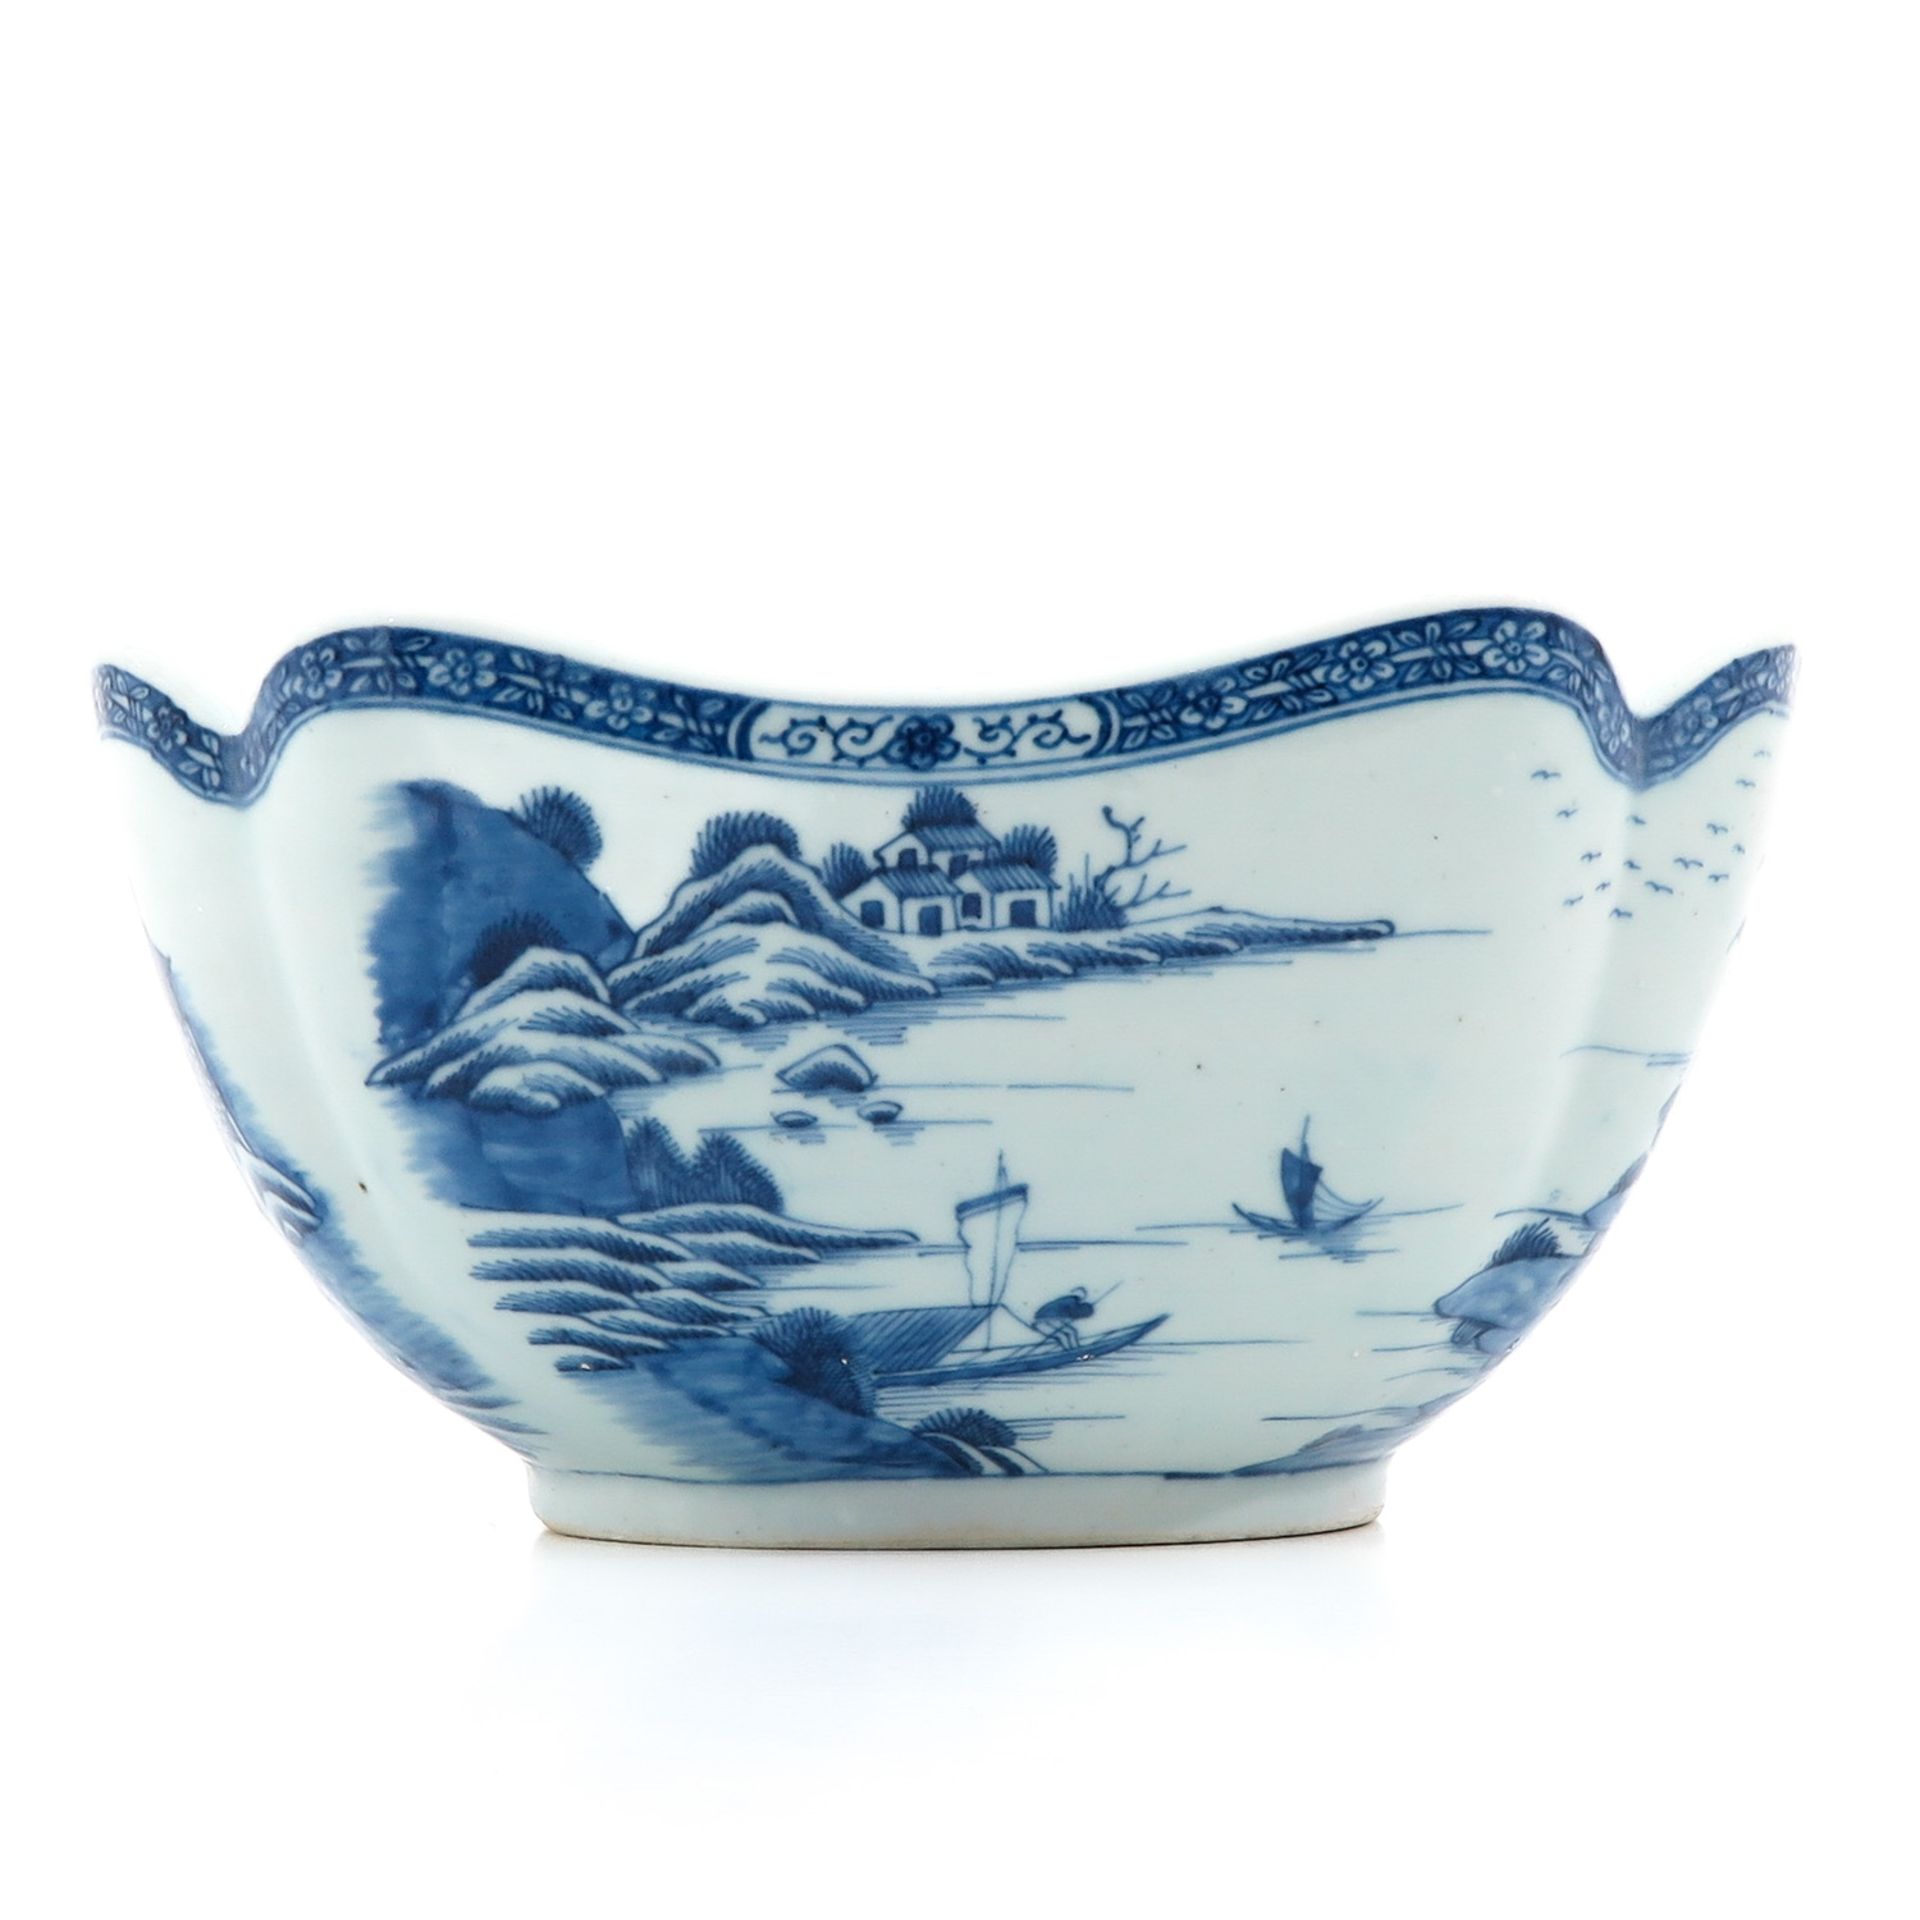 A Blue and White Serving Bowl - Image 4 of 9